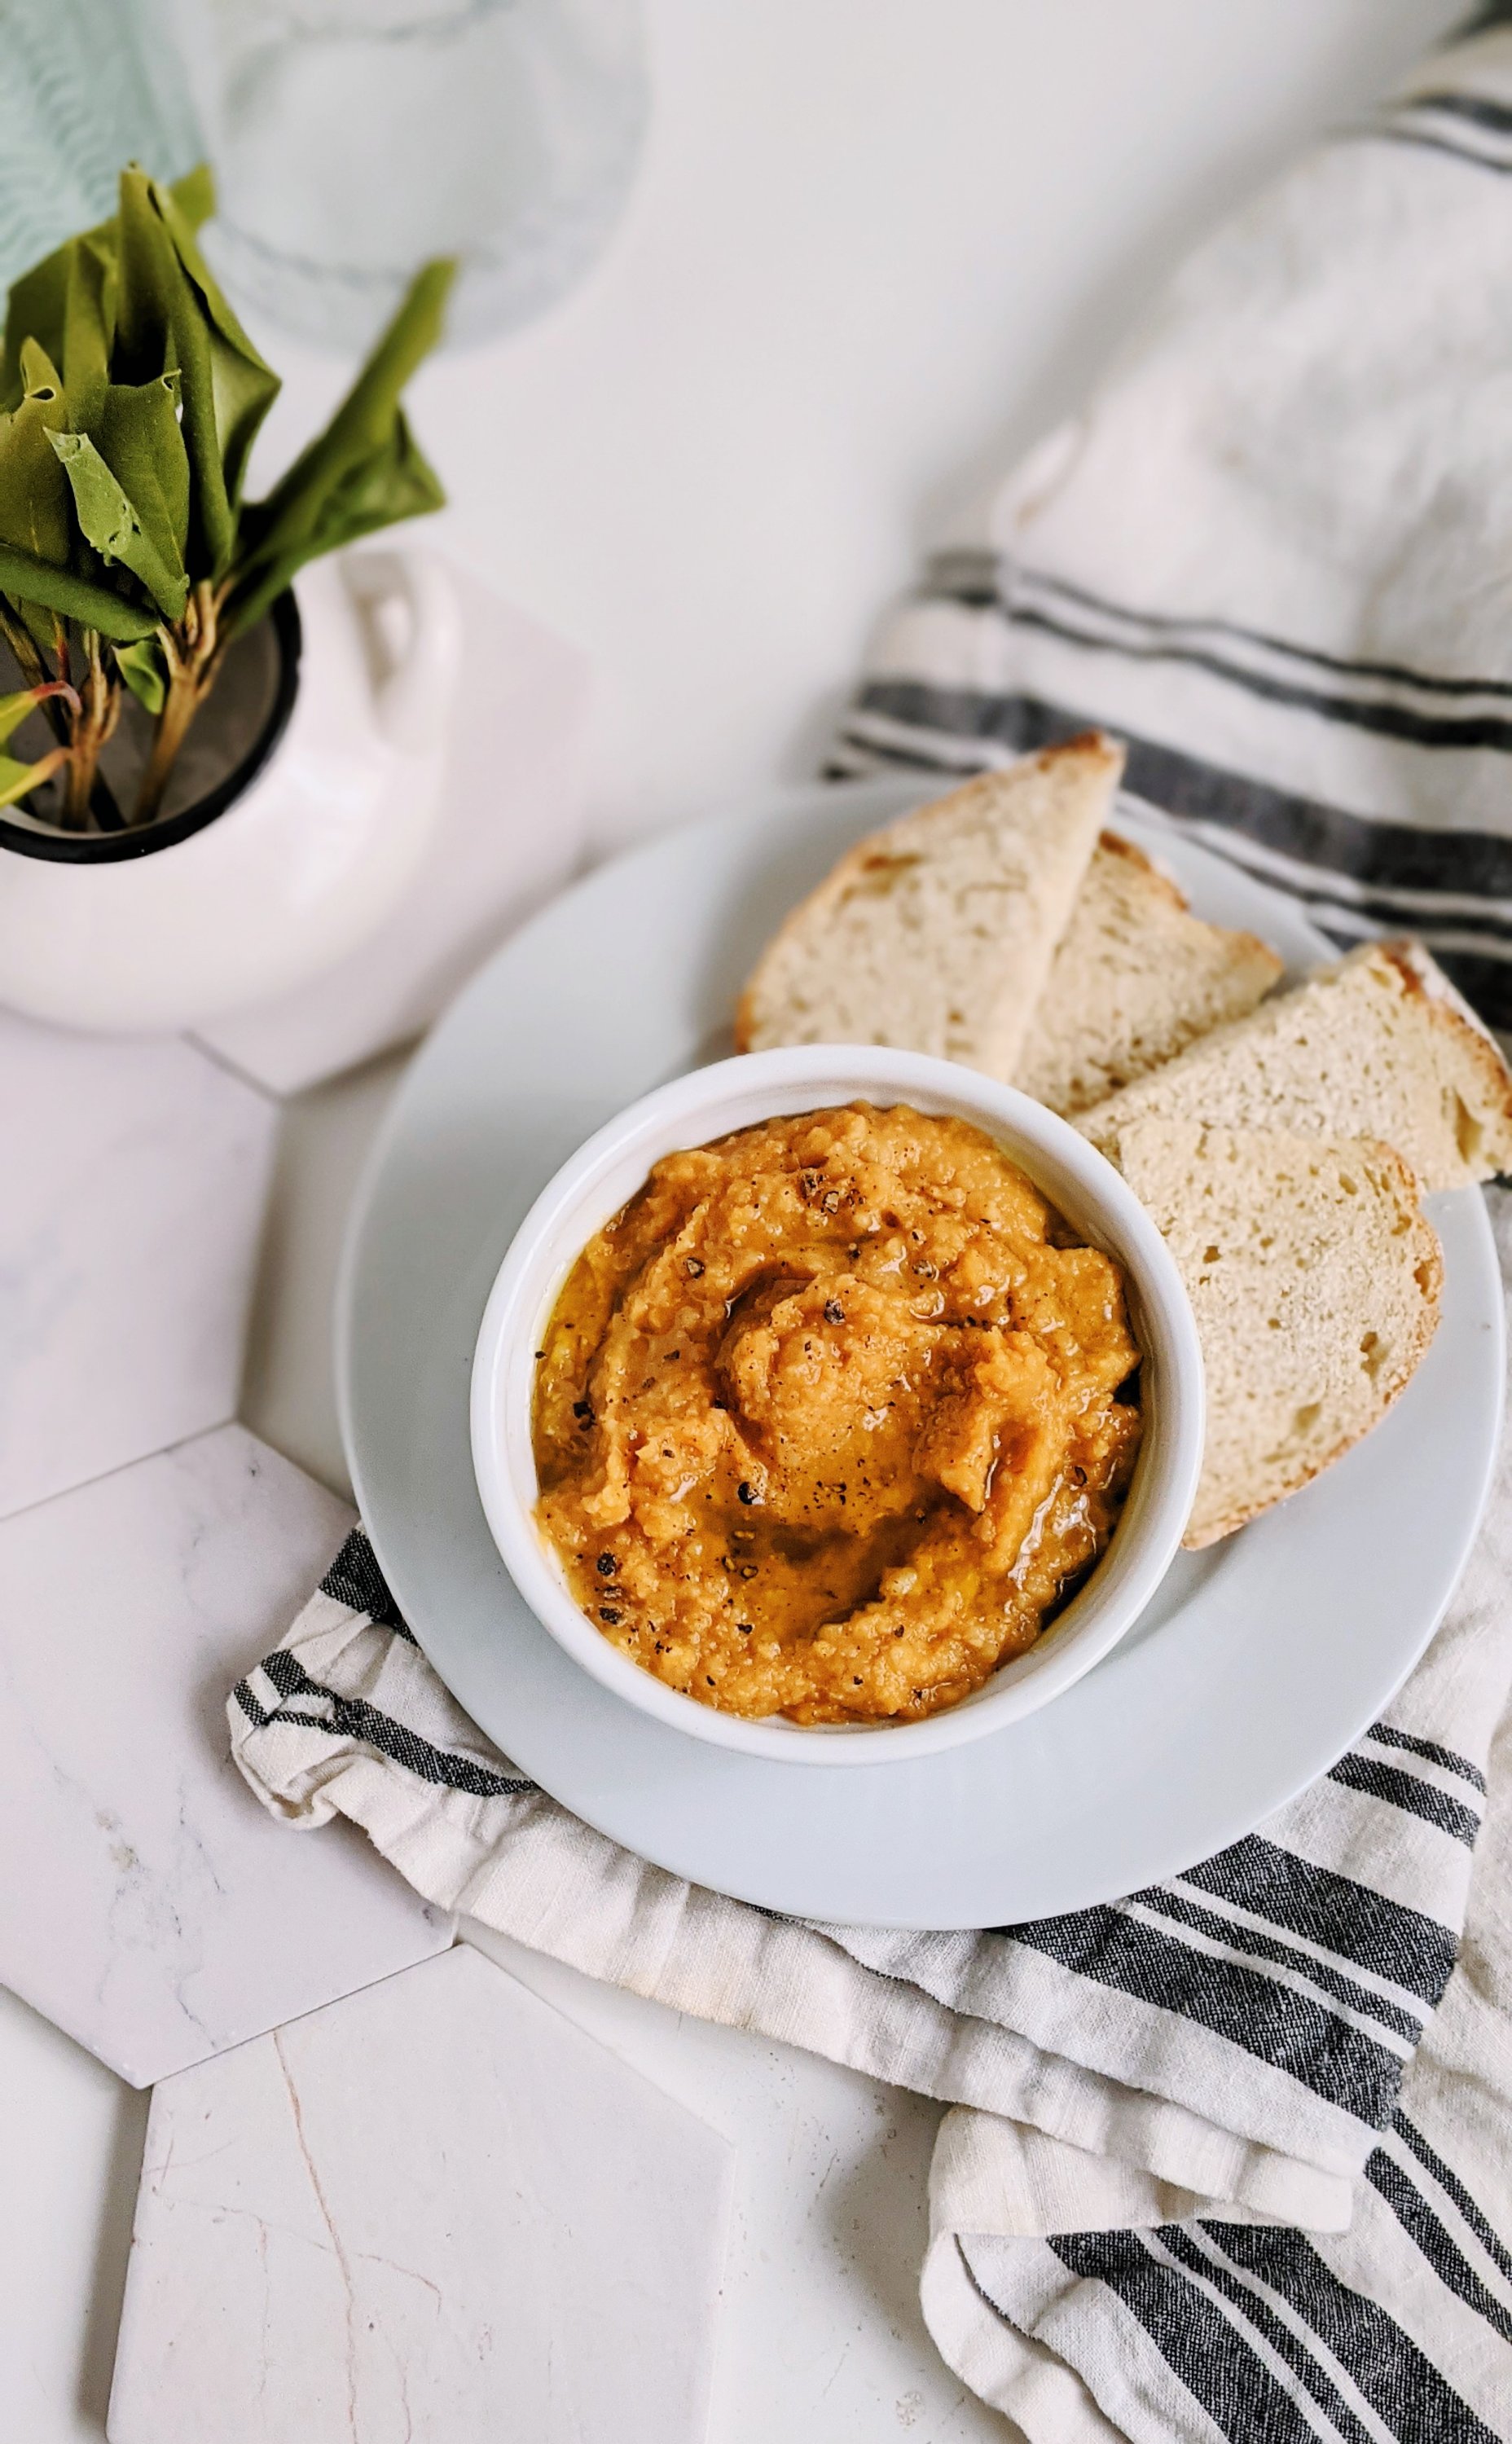 healthy vegetable hummus for fall recipe comfort foods healthy vegan vegetarian party dip recipes everyone will love pumpkin recipes with canned pumpkin